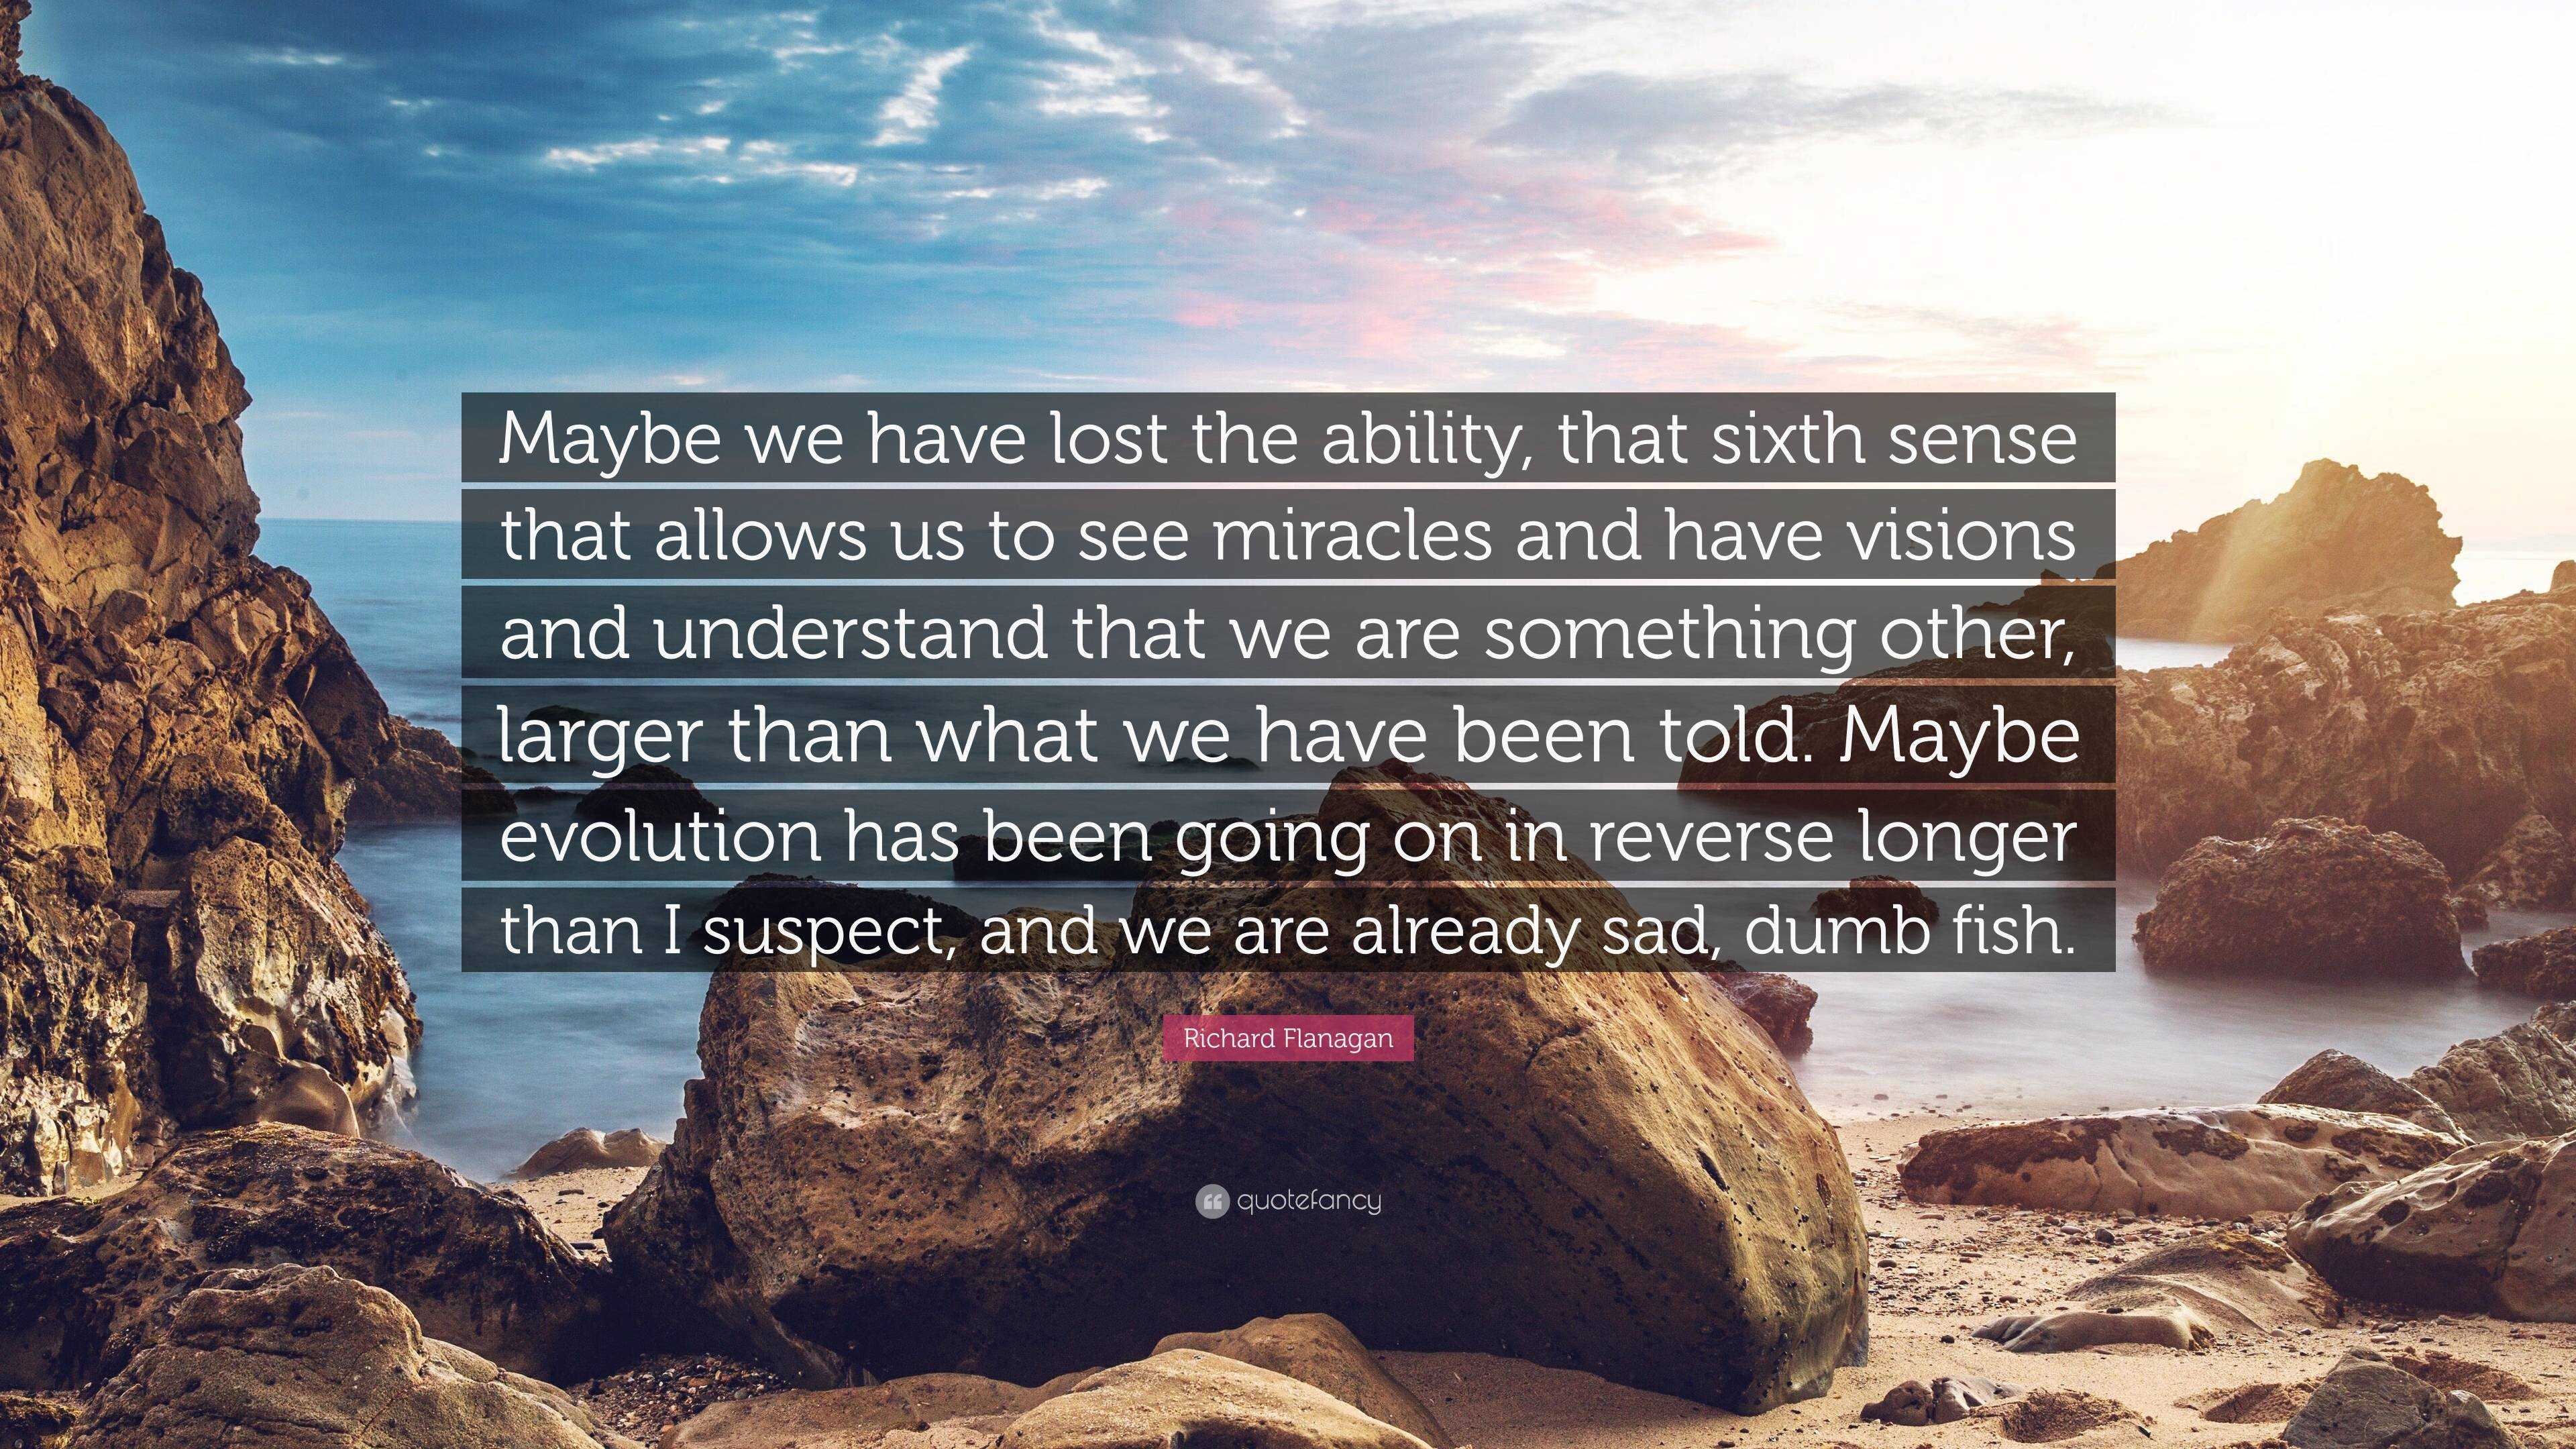 Richard Flanagan Quote: “Maybe we have lost the ability, that